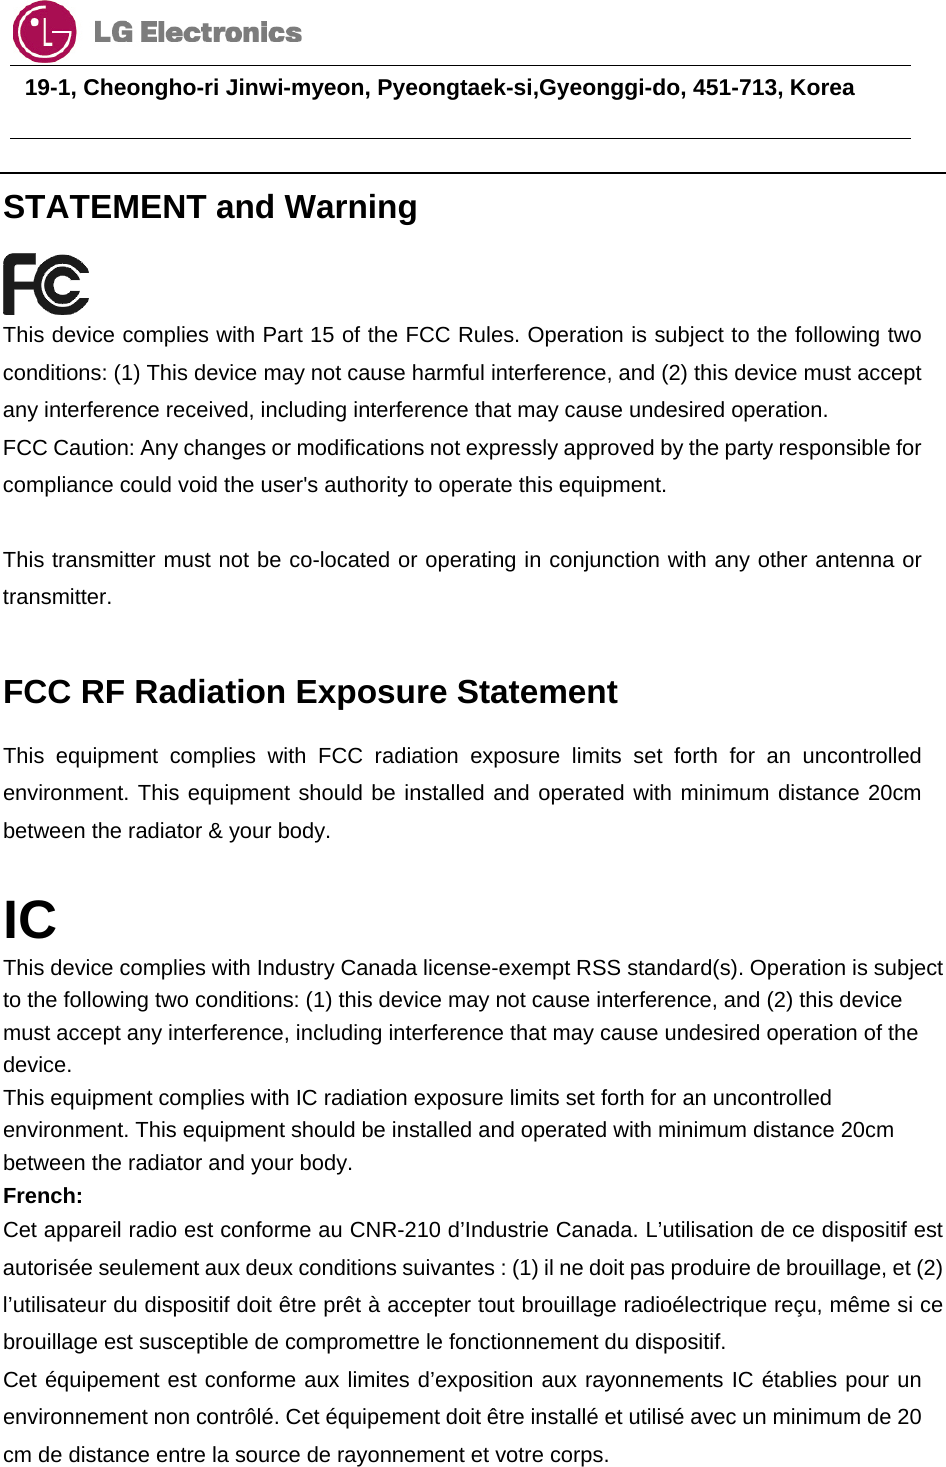                                  19-1, Cheongho-ri Jinwi-myeon, Pyeongtaek-si,Gyeonggi-do, 451-713, Korea       STATEMENT and Warning  This device complies with Part 15 of the FCC Rules. Operation is subject to the following two conditions: (1) This device may not cause harmful interference, and (2) this device must accept any interference received, including interference that may cause undesired operation. FCC Caution: Any changes or modifications not expressly approved by the party responsible for compliance could void the user&apos;s authority to operate this equipment.   This transmitter must not be co-located or operating in conjunction with any other antenna or transmitter.  FCC RF Radiation Exposure Statement This equipment complies with FCC radiation exposure limits set forth for an uncontrolled environment. This equipment should be installed and operated with minimum distance 20cm between the radiator &amp; your body.  IC This device complies with Industry Canada license-exempt RSS standard(s). Operation is subject to the following two conditions: (1) this device may not cause interference, and (2) this device must accept any interference, including interference that may cause undesired operation of the device. This equipment complies with IC radiation exposure limits set forth for an uncontrolled environment. This equipment should be installed and operated with minimum distance 20cm between the radiator and your body. French: Cet appareil radio est conforme au CNR-210 d’Industrie Canada. L’utilisation de ce dispositif est autorisée seulement aux deux conditions suivantes : (1) il ne doit pas produire de brouillage, et (2) l’utilisateur du dispositif doit être prêt à accepter tout brouillage radioélectrique reçu, même si ce brouillage est susceptible de compromettre le fonctionnement du dispositif. Cet équipement est conforme aux limites d’exposition aux rayonnements IC établies pour un environnement non contrôlé. Cet équipement doit être installé et utilisé avec un minimum de 20 cm de distance entre la source de rayonnement et votre corps.  